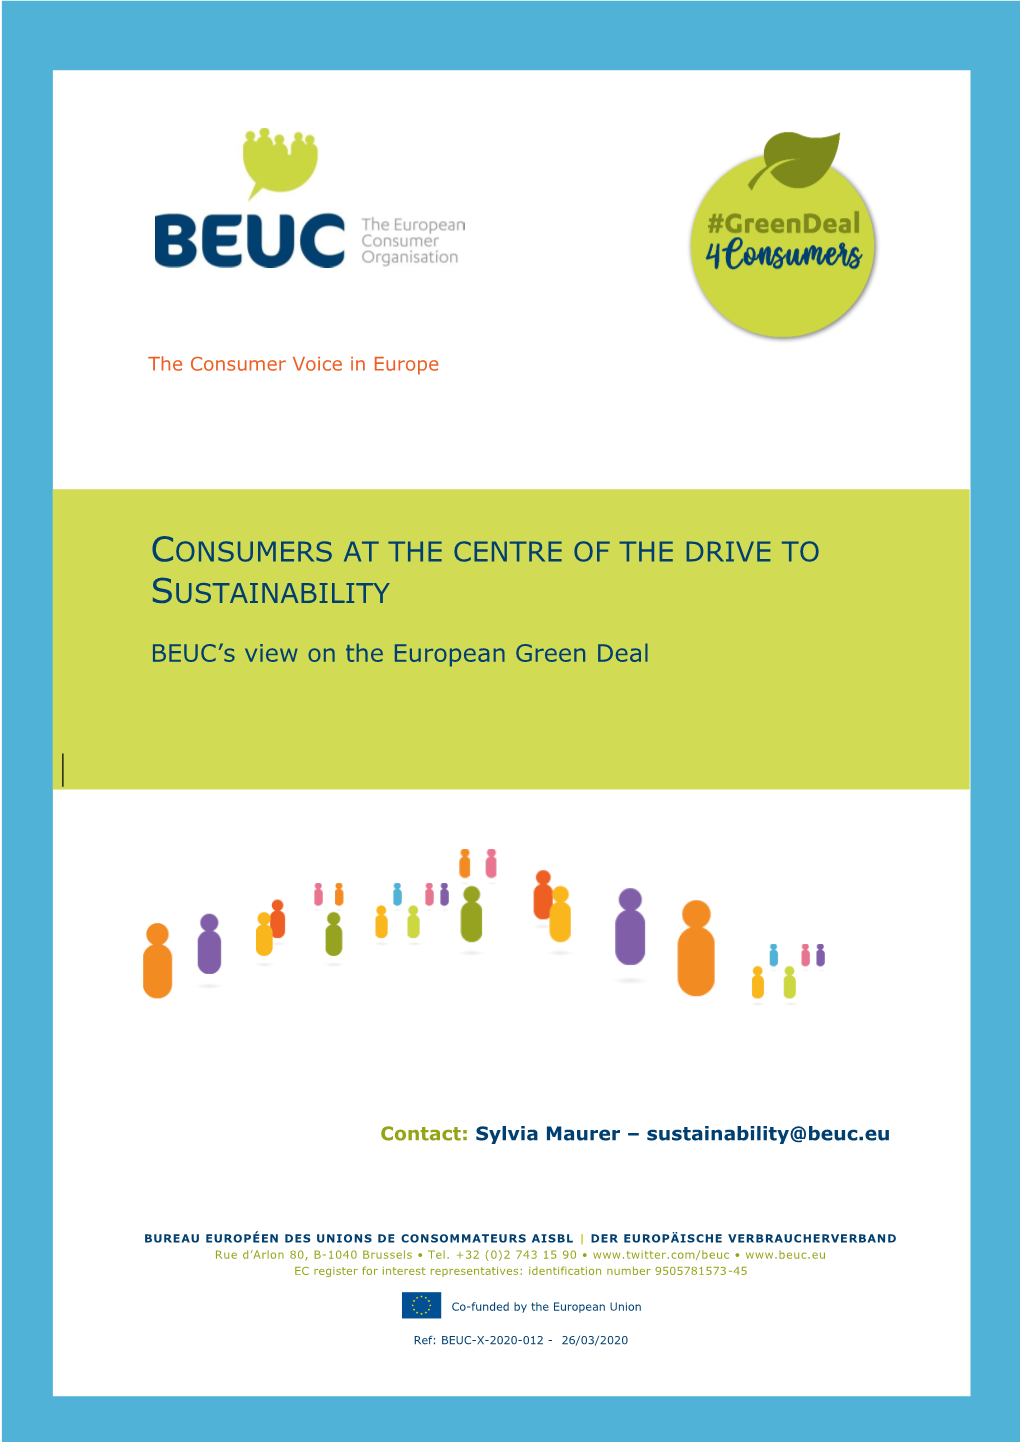 BEUC's View on the European Green Deal